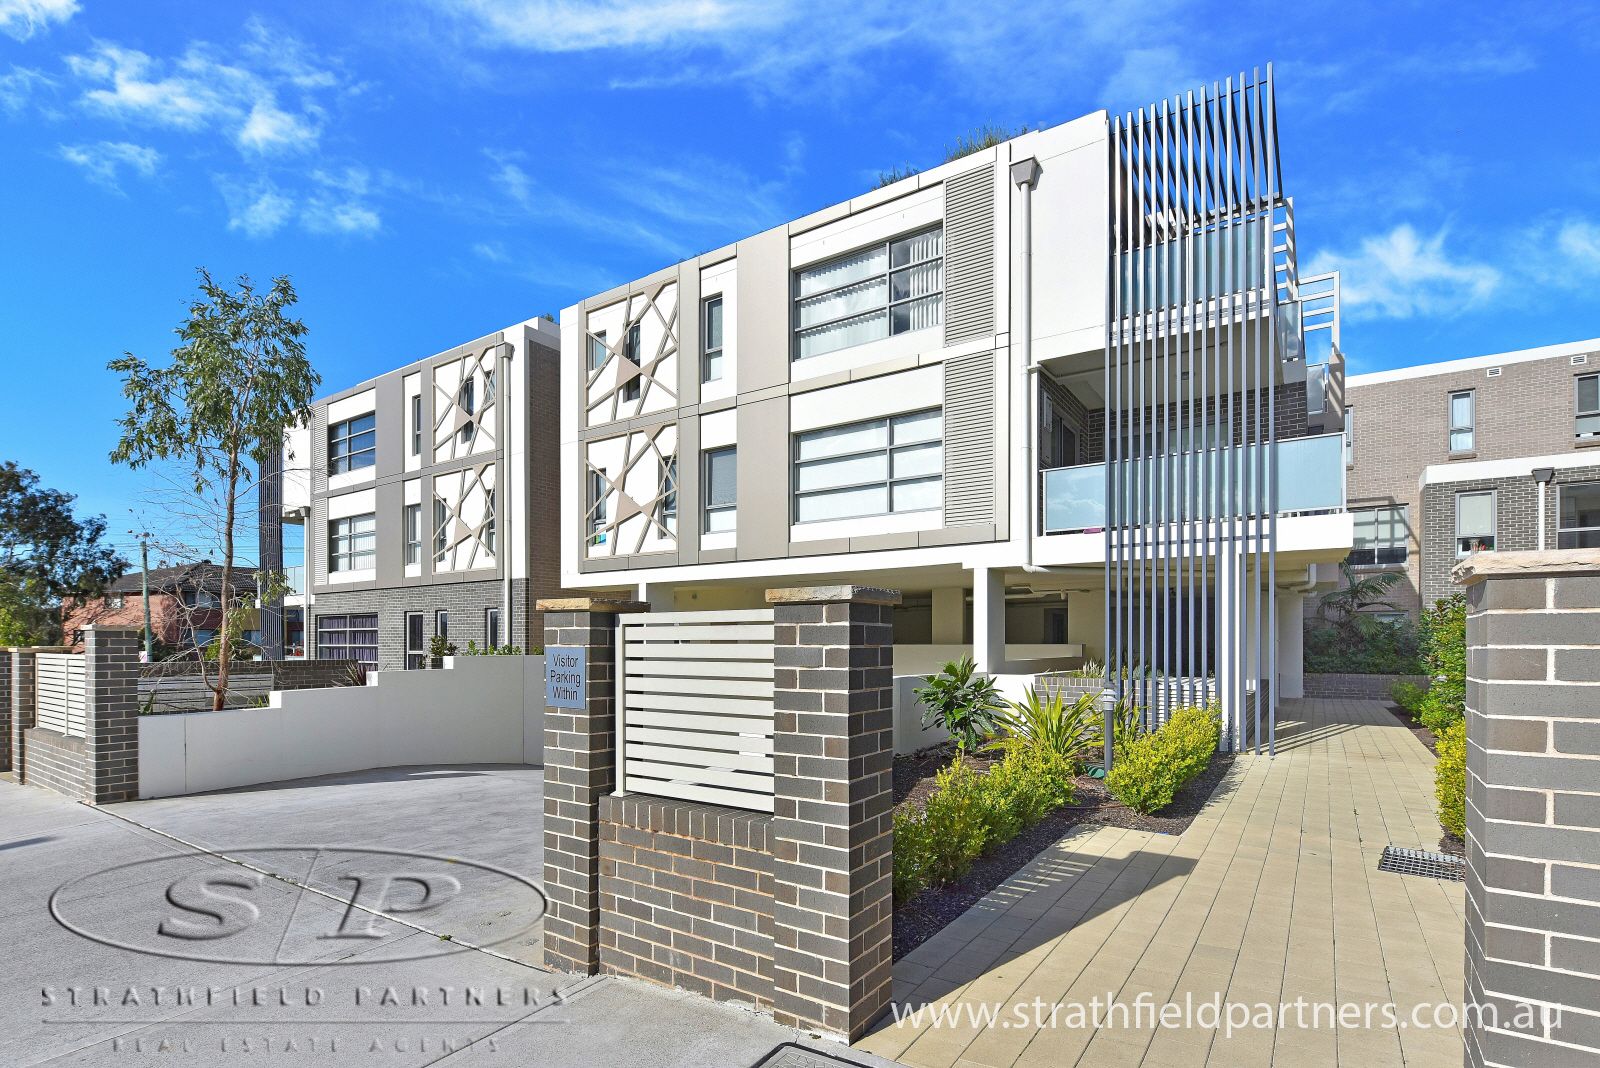 7/548 Liverpool Road, Strathfield South NSW 2136, Image 1